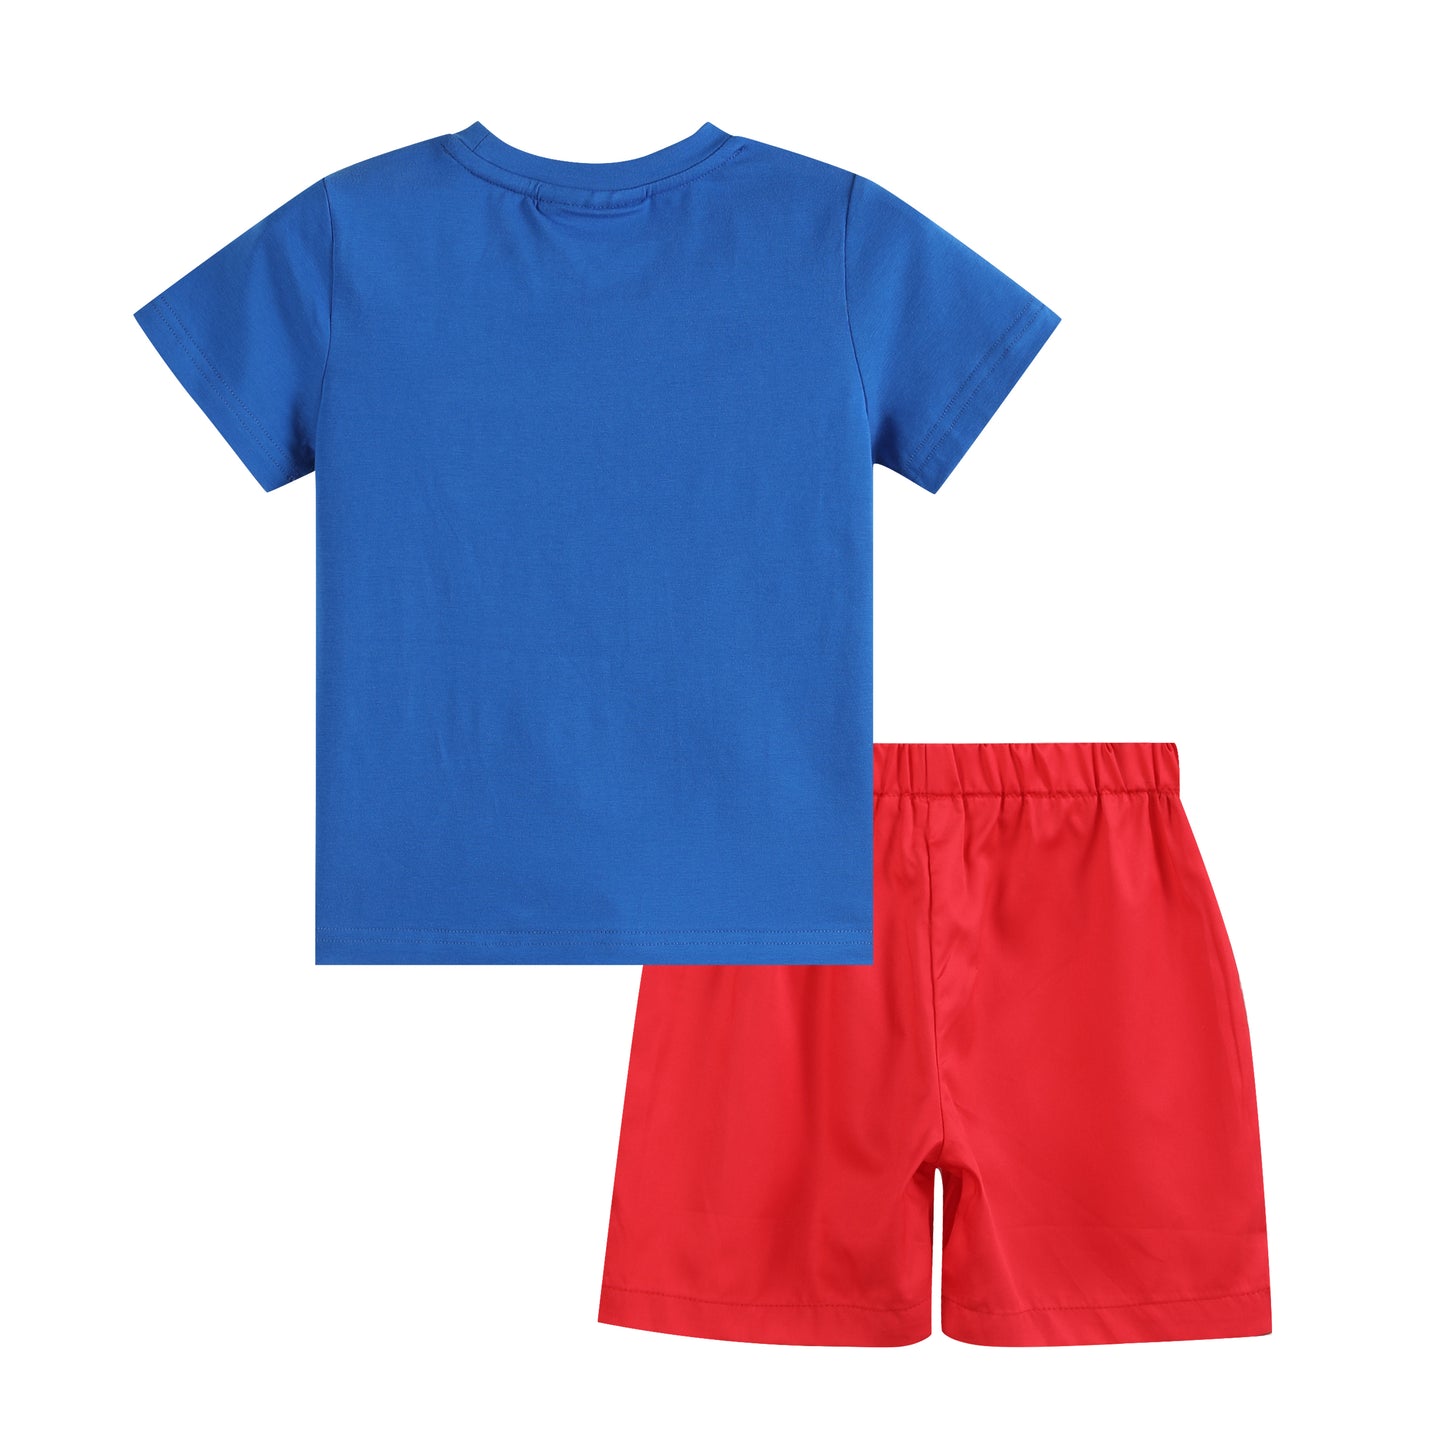 Blue & Red Boats Applique Crewneck Tee & Red Shorts